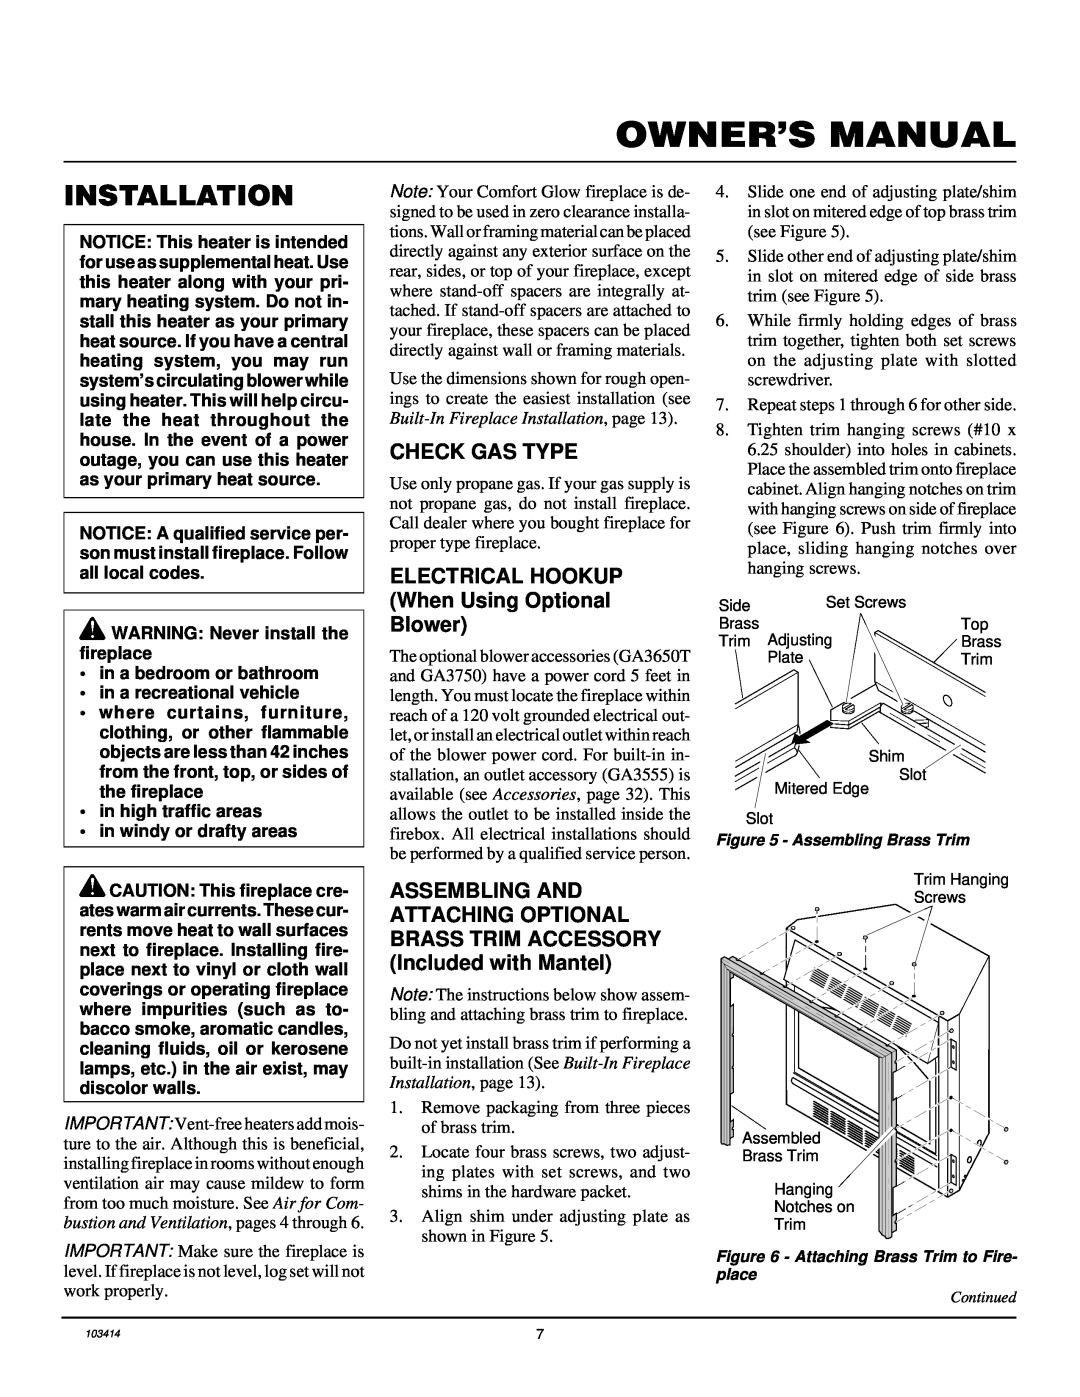 Desa CGFP28PT installation manual Installation, Check Gas Type, ELECTRICAL HOOKUP When Using Optional Blower 